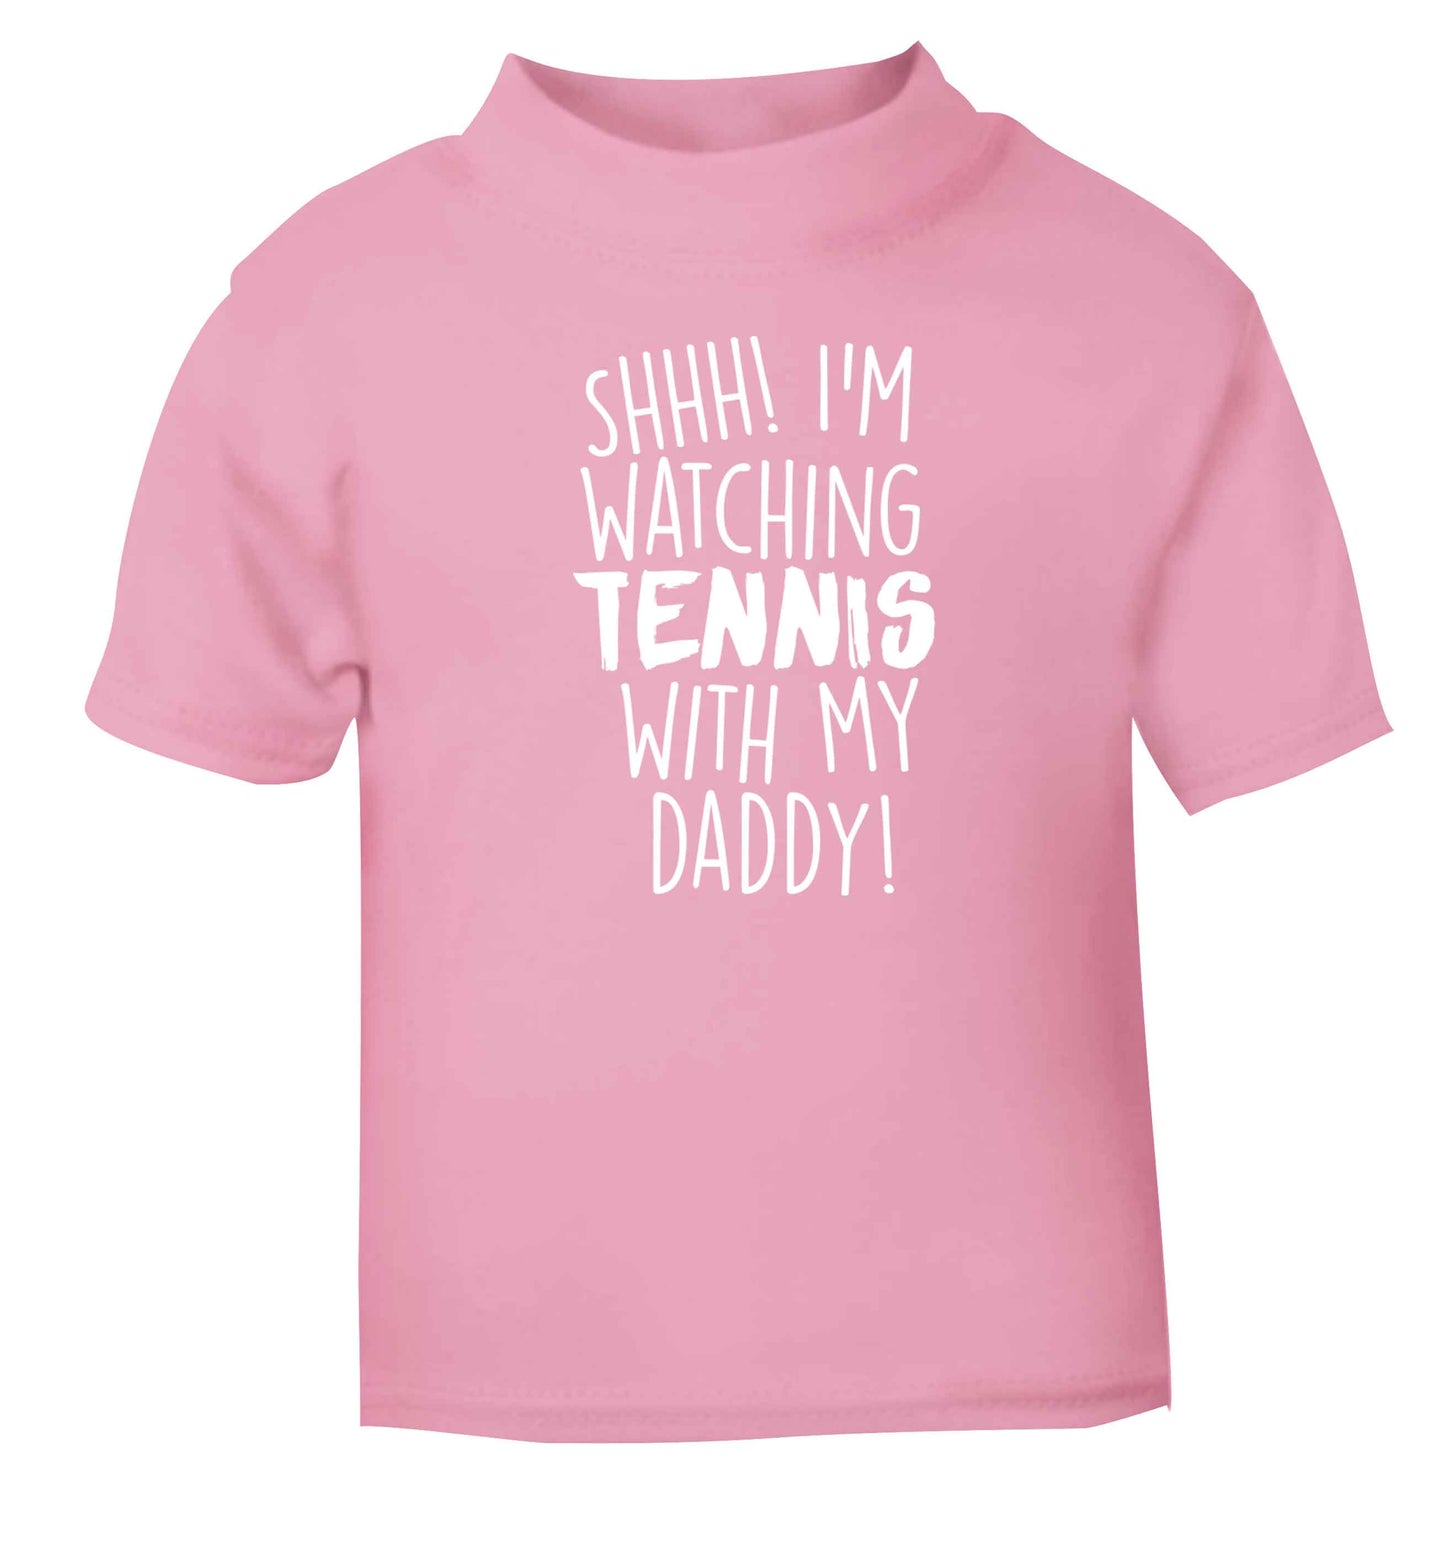 Shh! I'm watching tennis with my daddy! light pink Baby Toddler Tshirt 2 Years